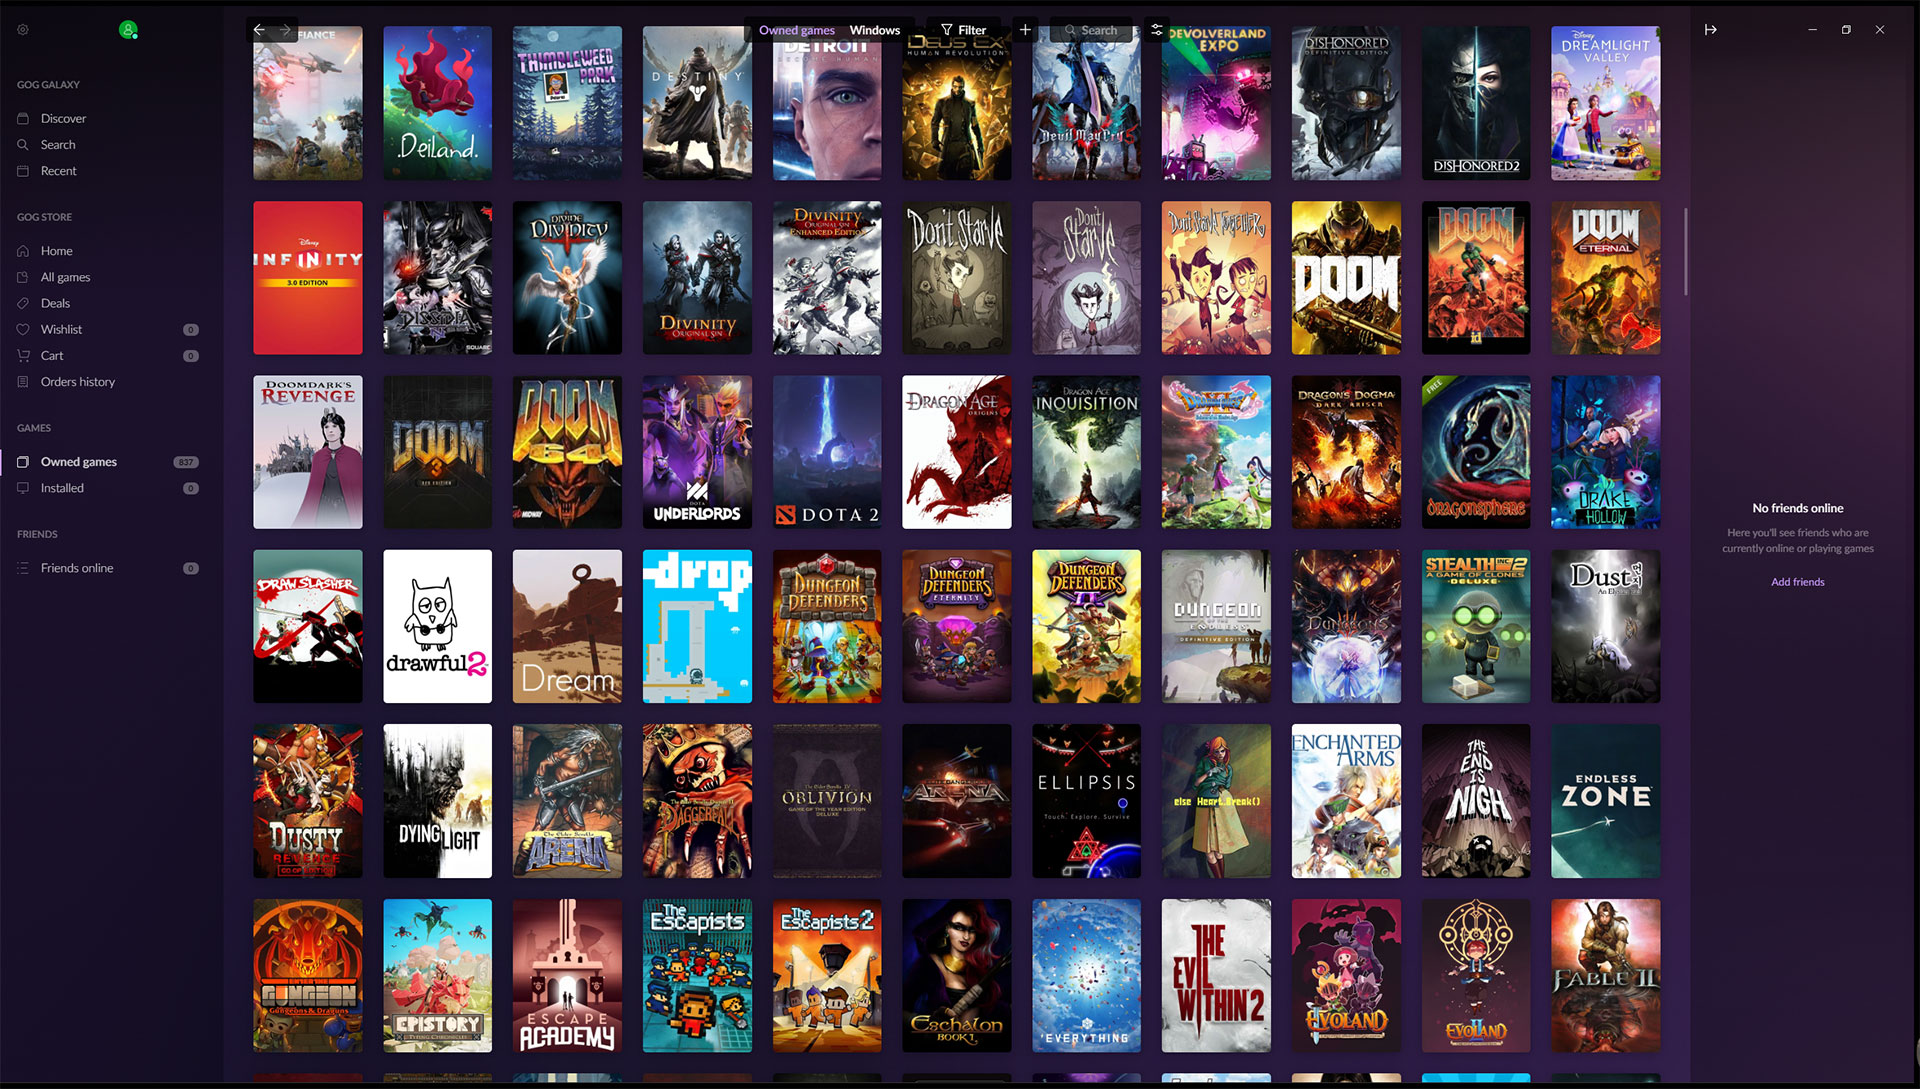 GOG Galaxy will delete cloud save files bigger than 200MB after August 31